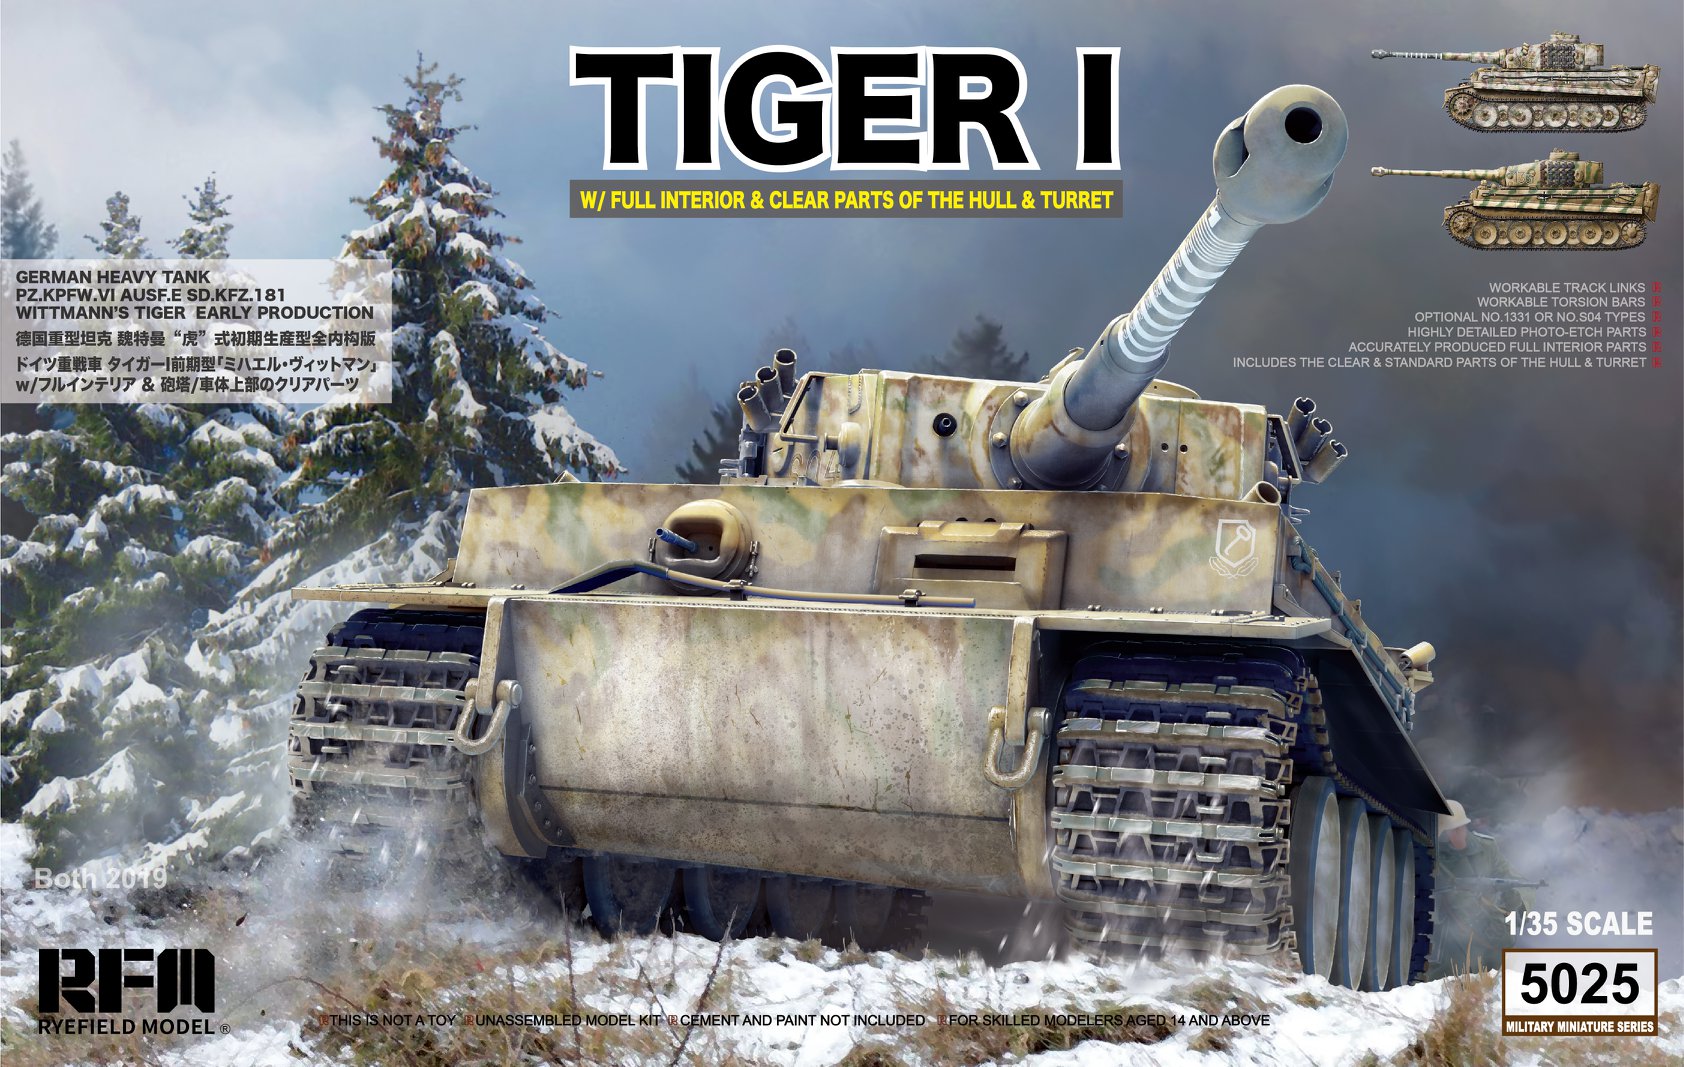 German Tiger I Early Production Wittmann's Tiger with full interior and clear parts with workable tracks 1/35